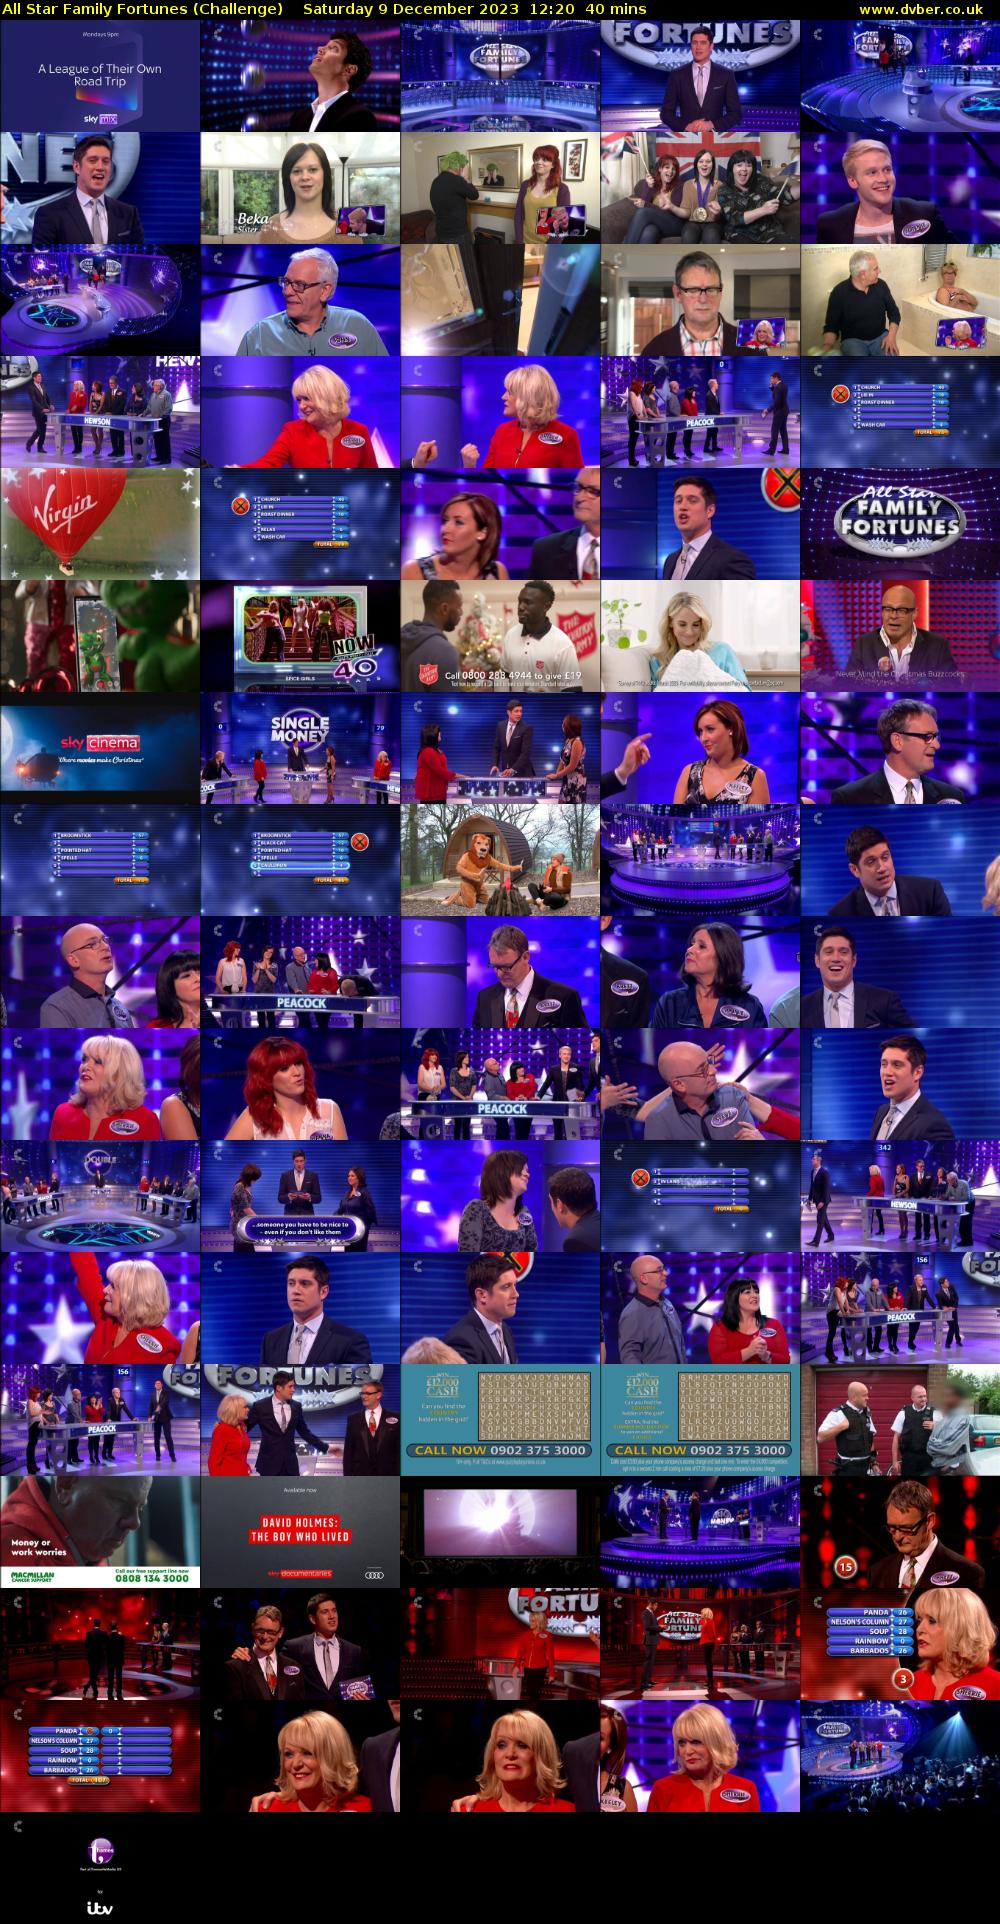 All Star Family Fortunes (Challenge) Saturday 9 December 2023 12:20 - 13:00